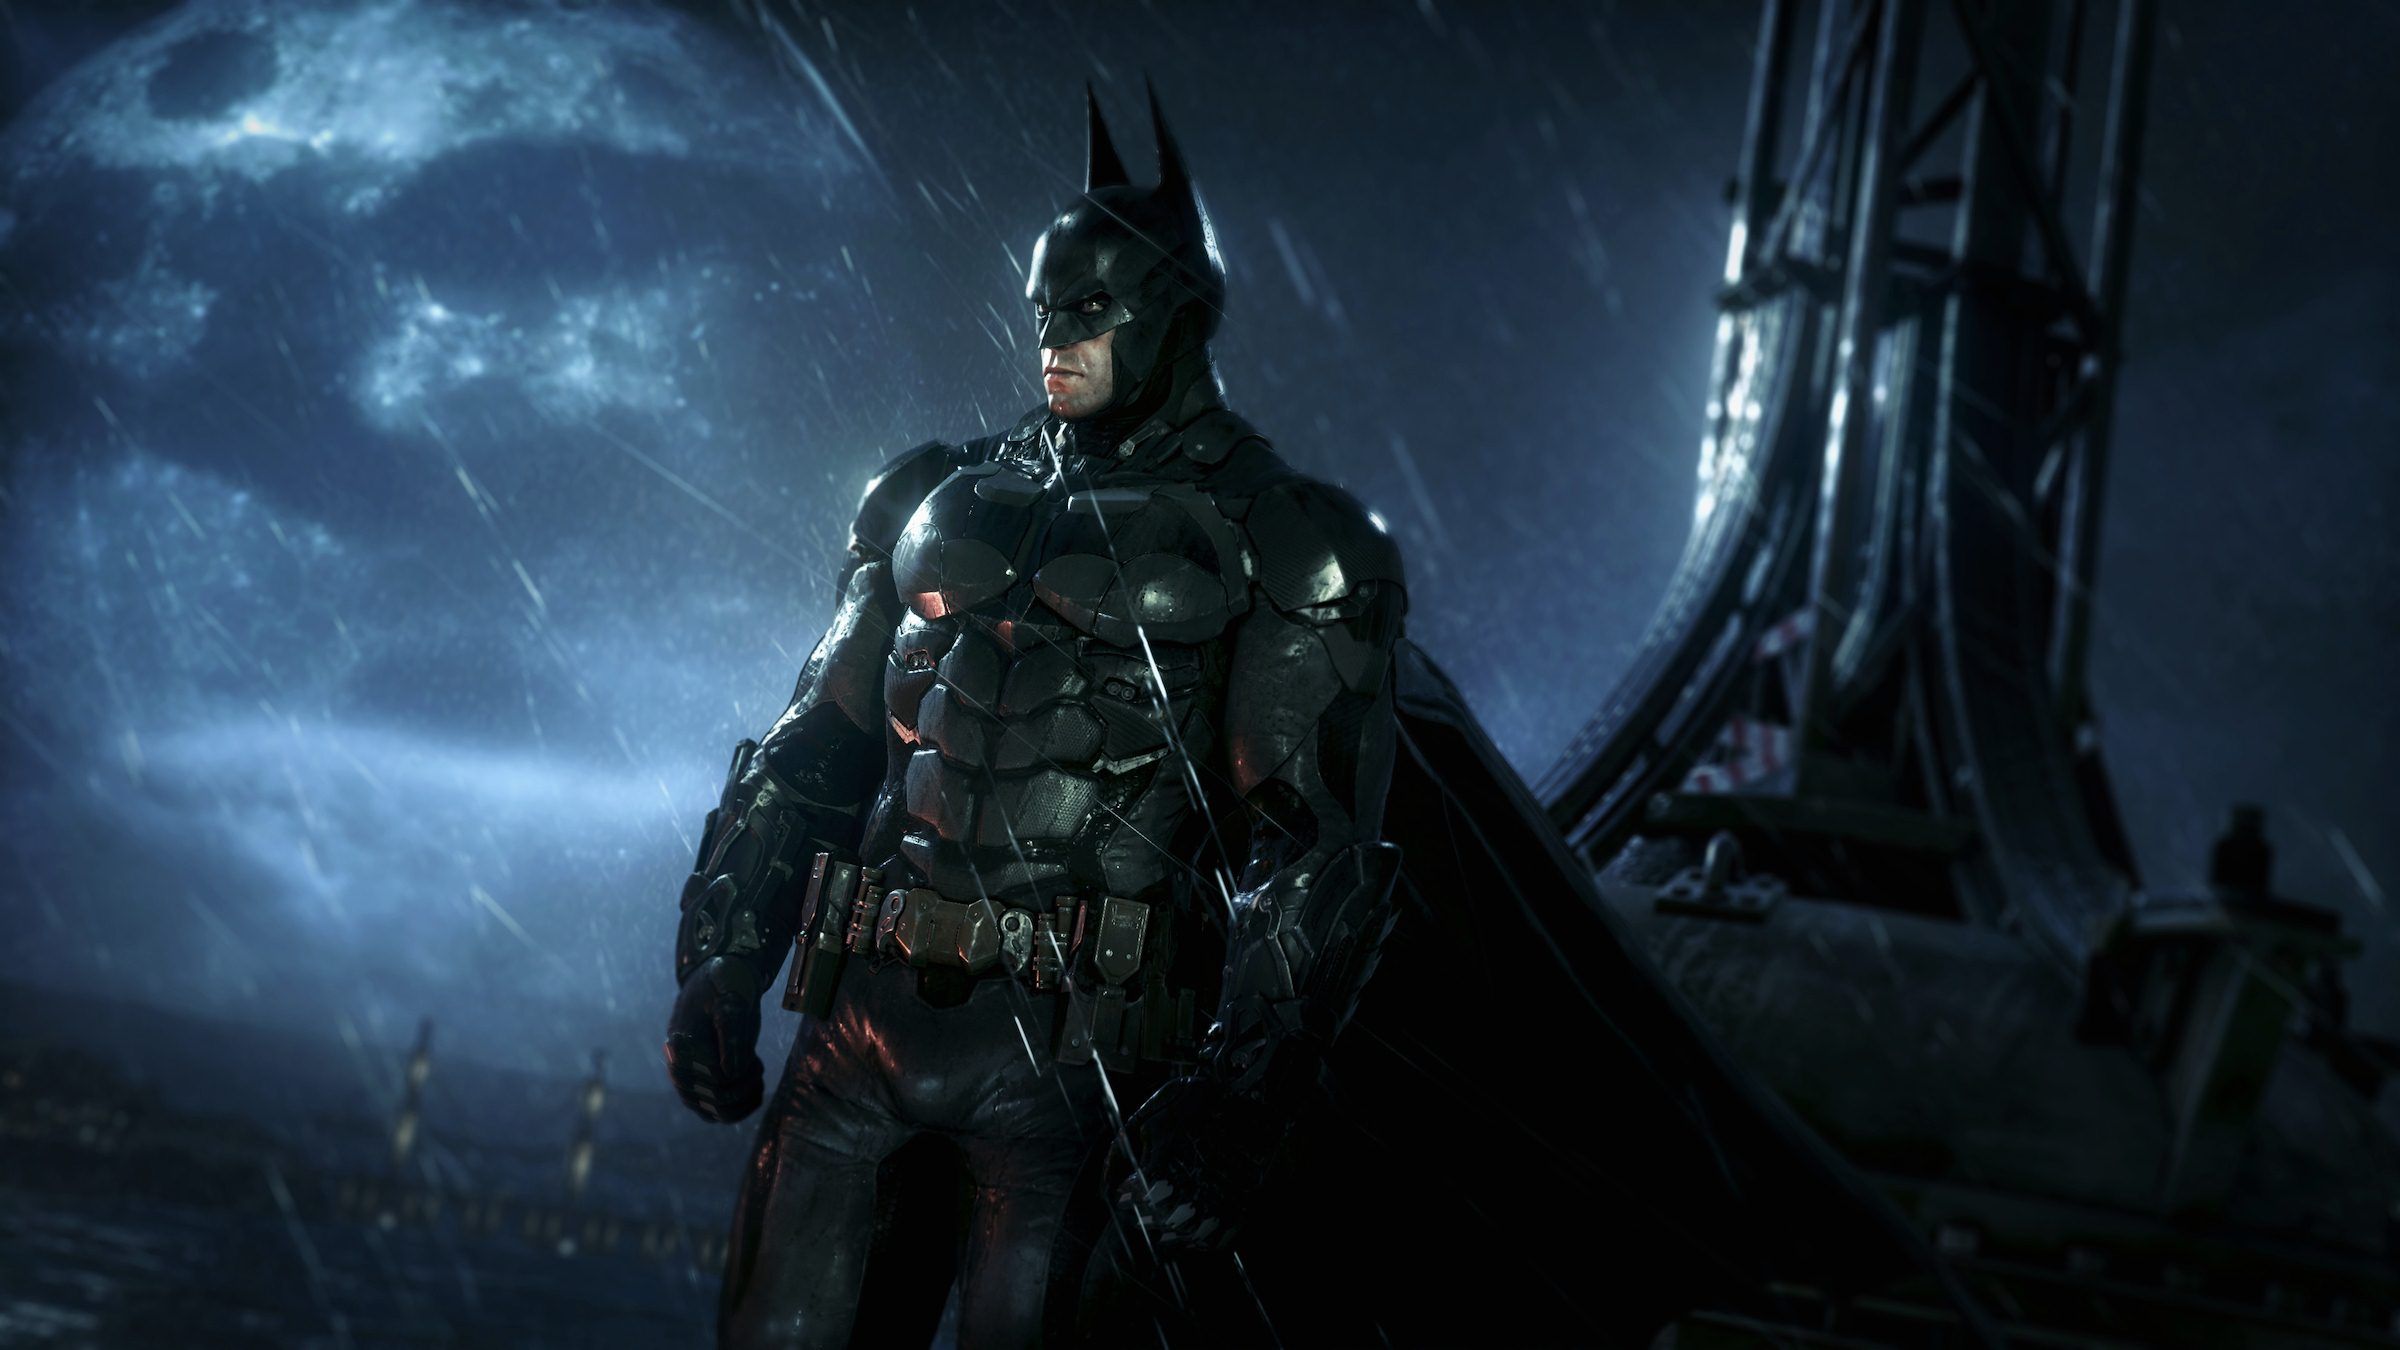 Batman Arkham Knight Wallpapers High Quality | Download Free